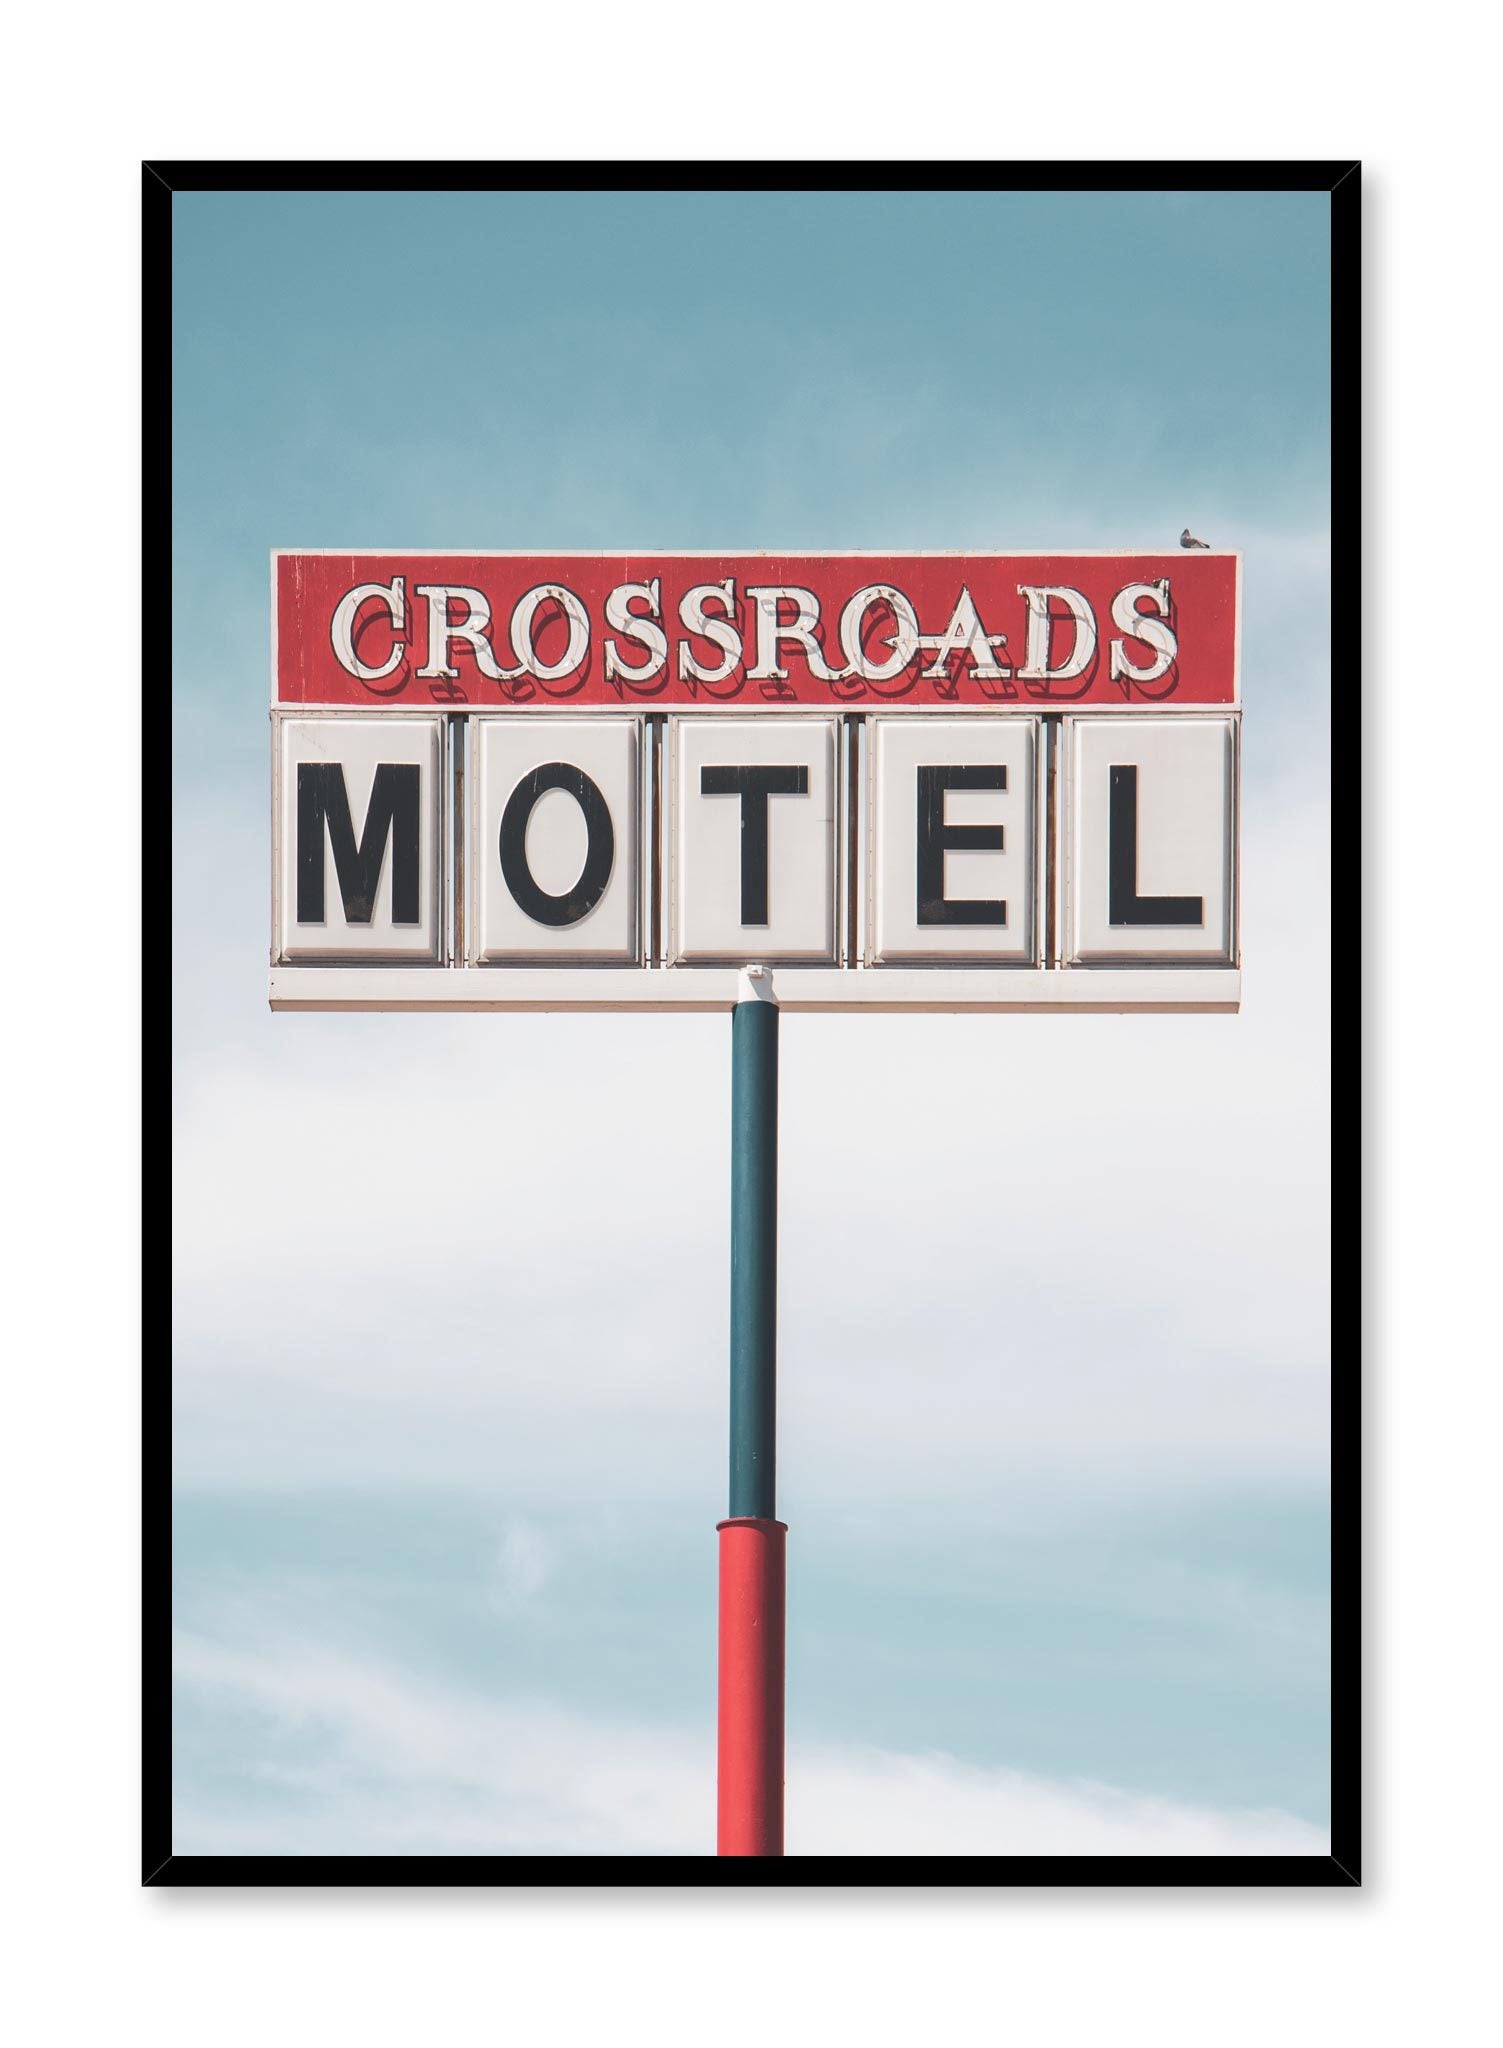 Minimalist design poster by Opposite Wall with photography of Crossroads Motel sign